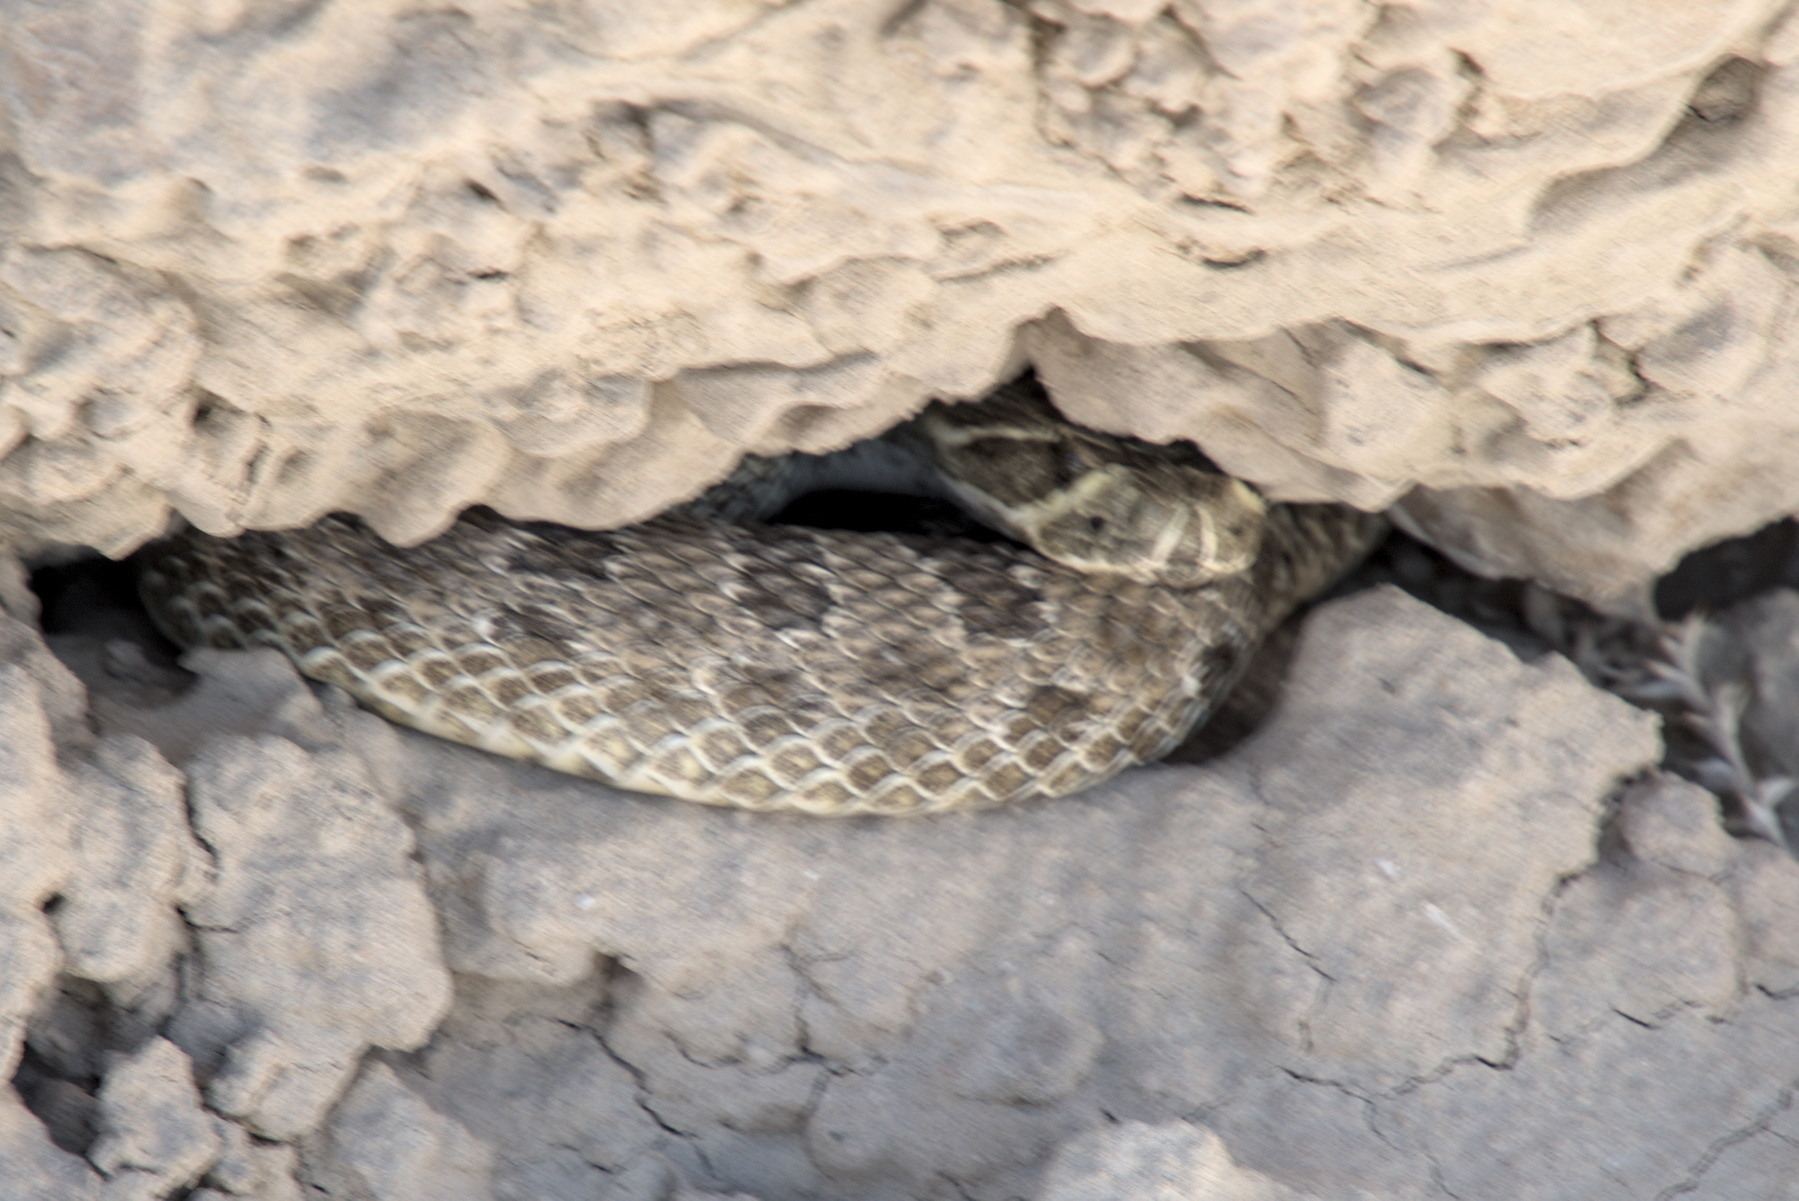 Rattlesnake coiled up in small gap under a rock ledge.